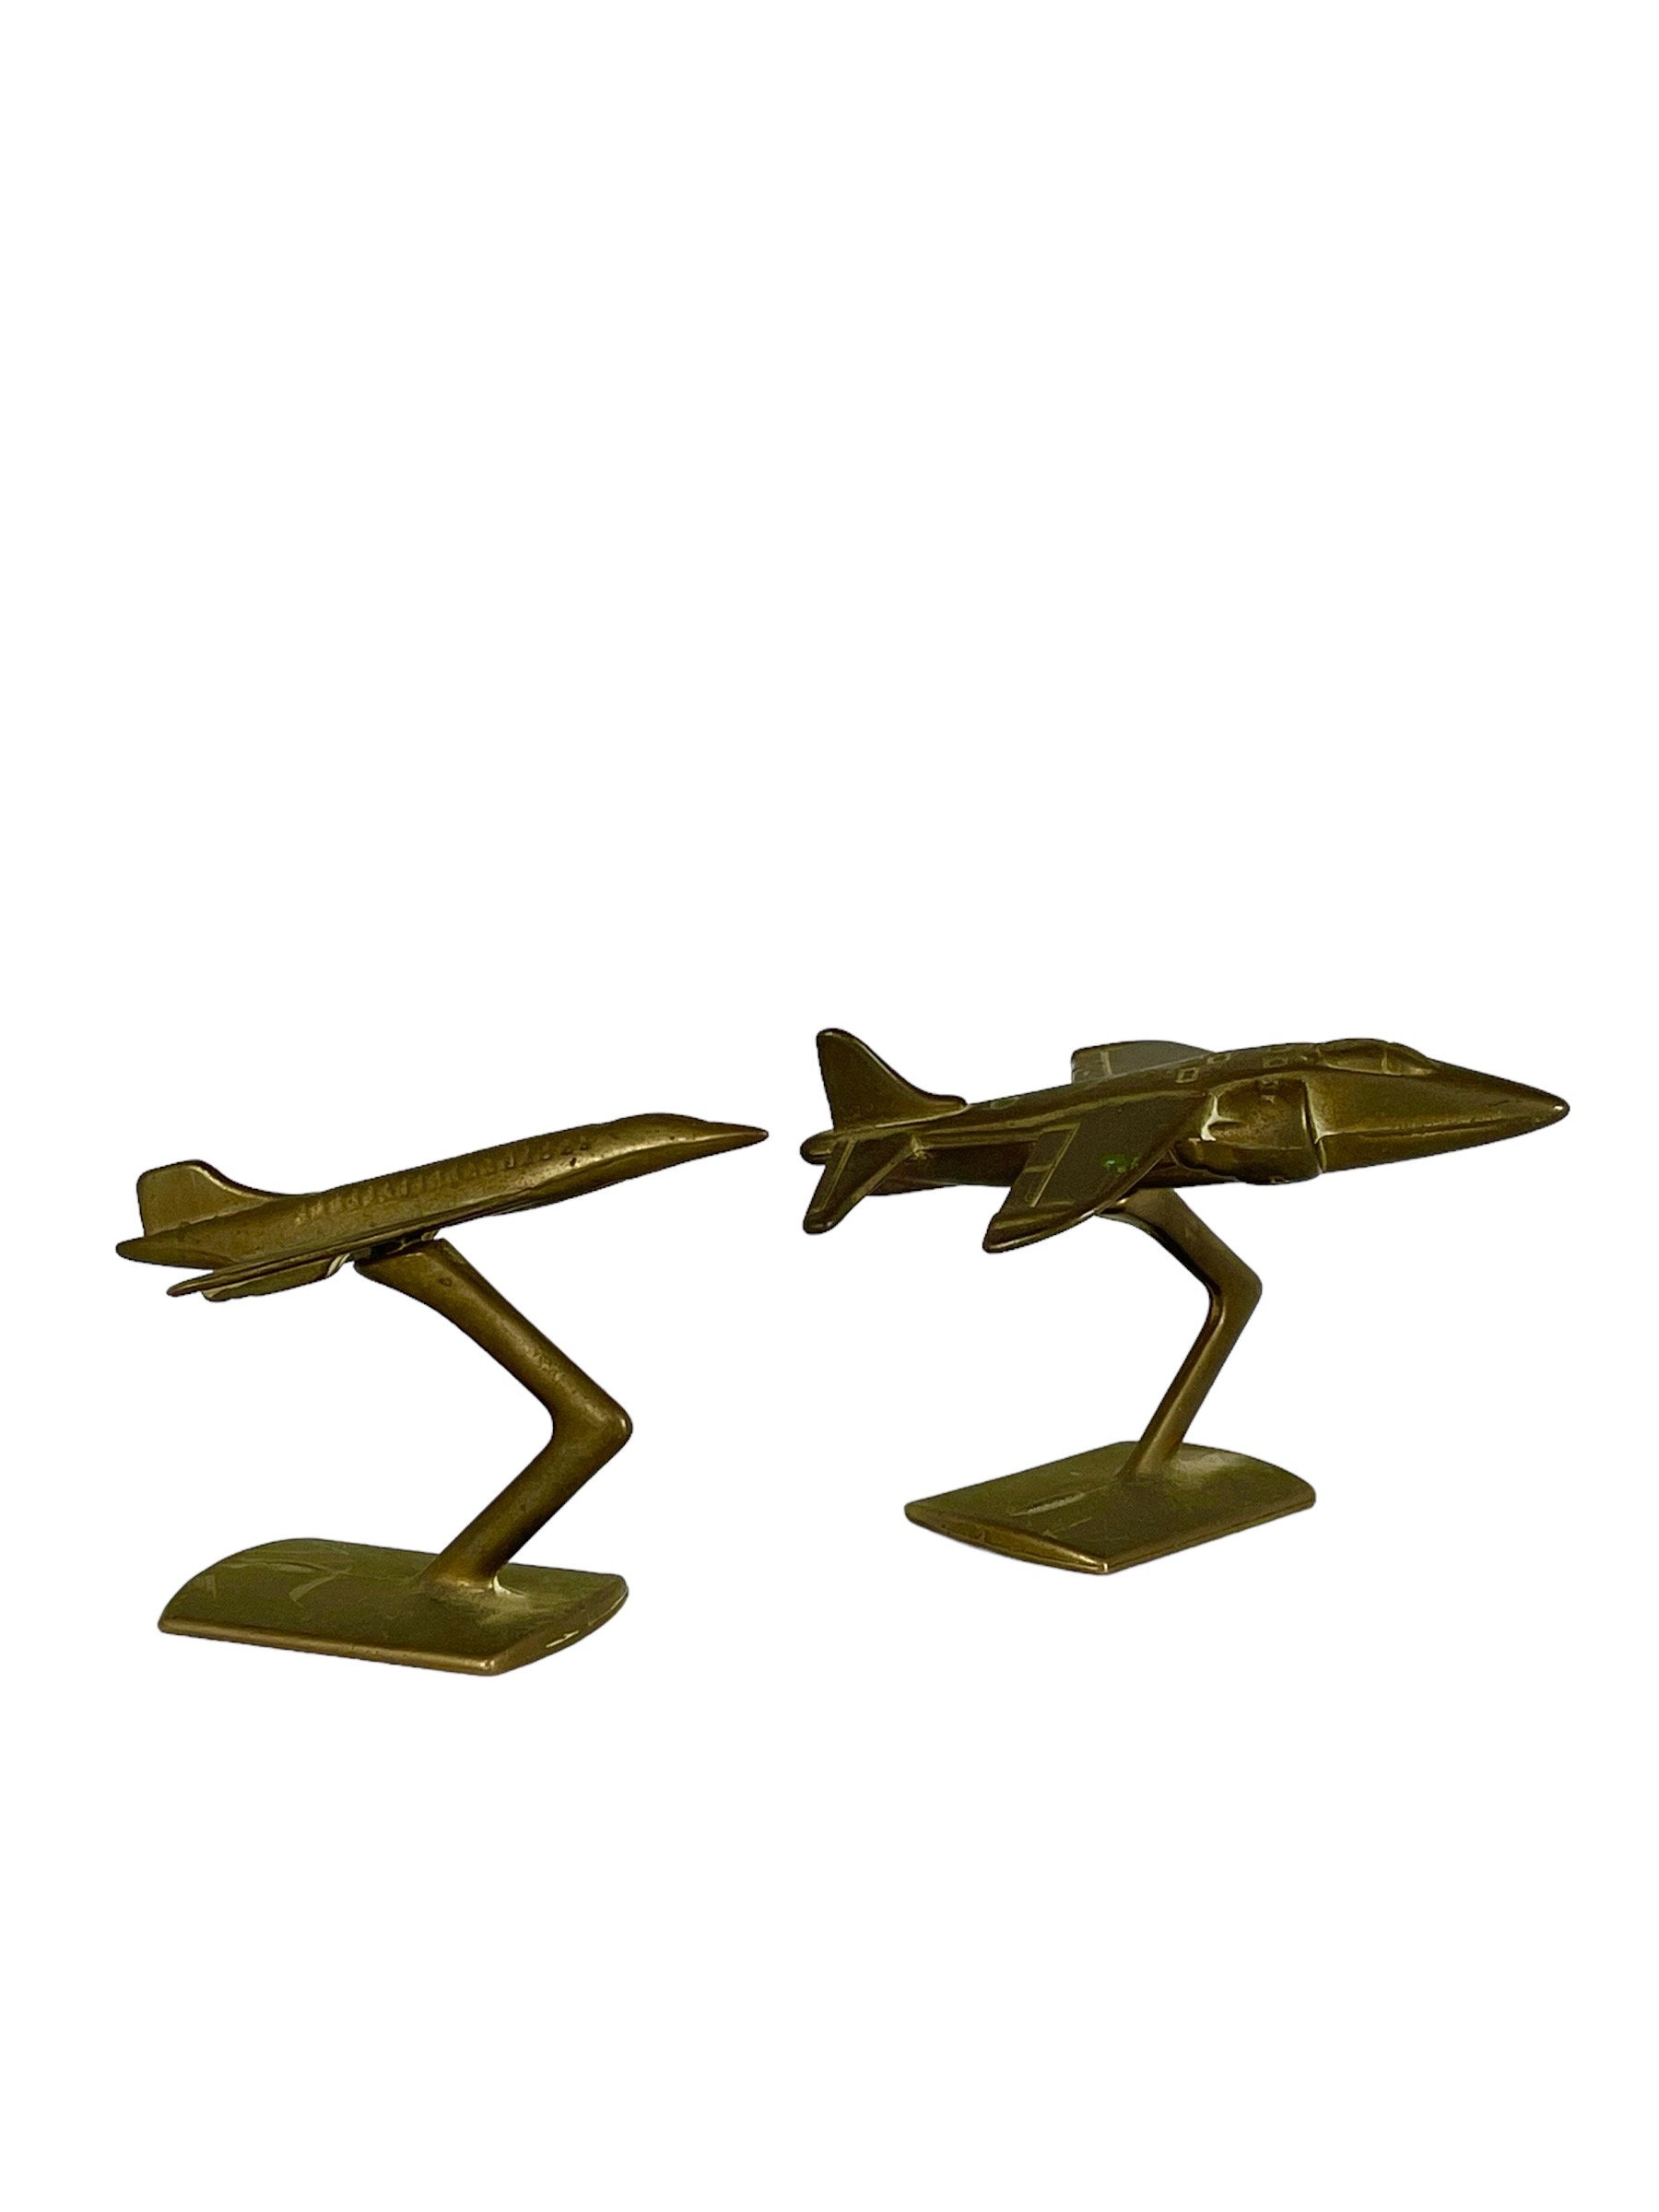 AIRPLANE Desk Paperweight Decor Statue Brass & Marble from